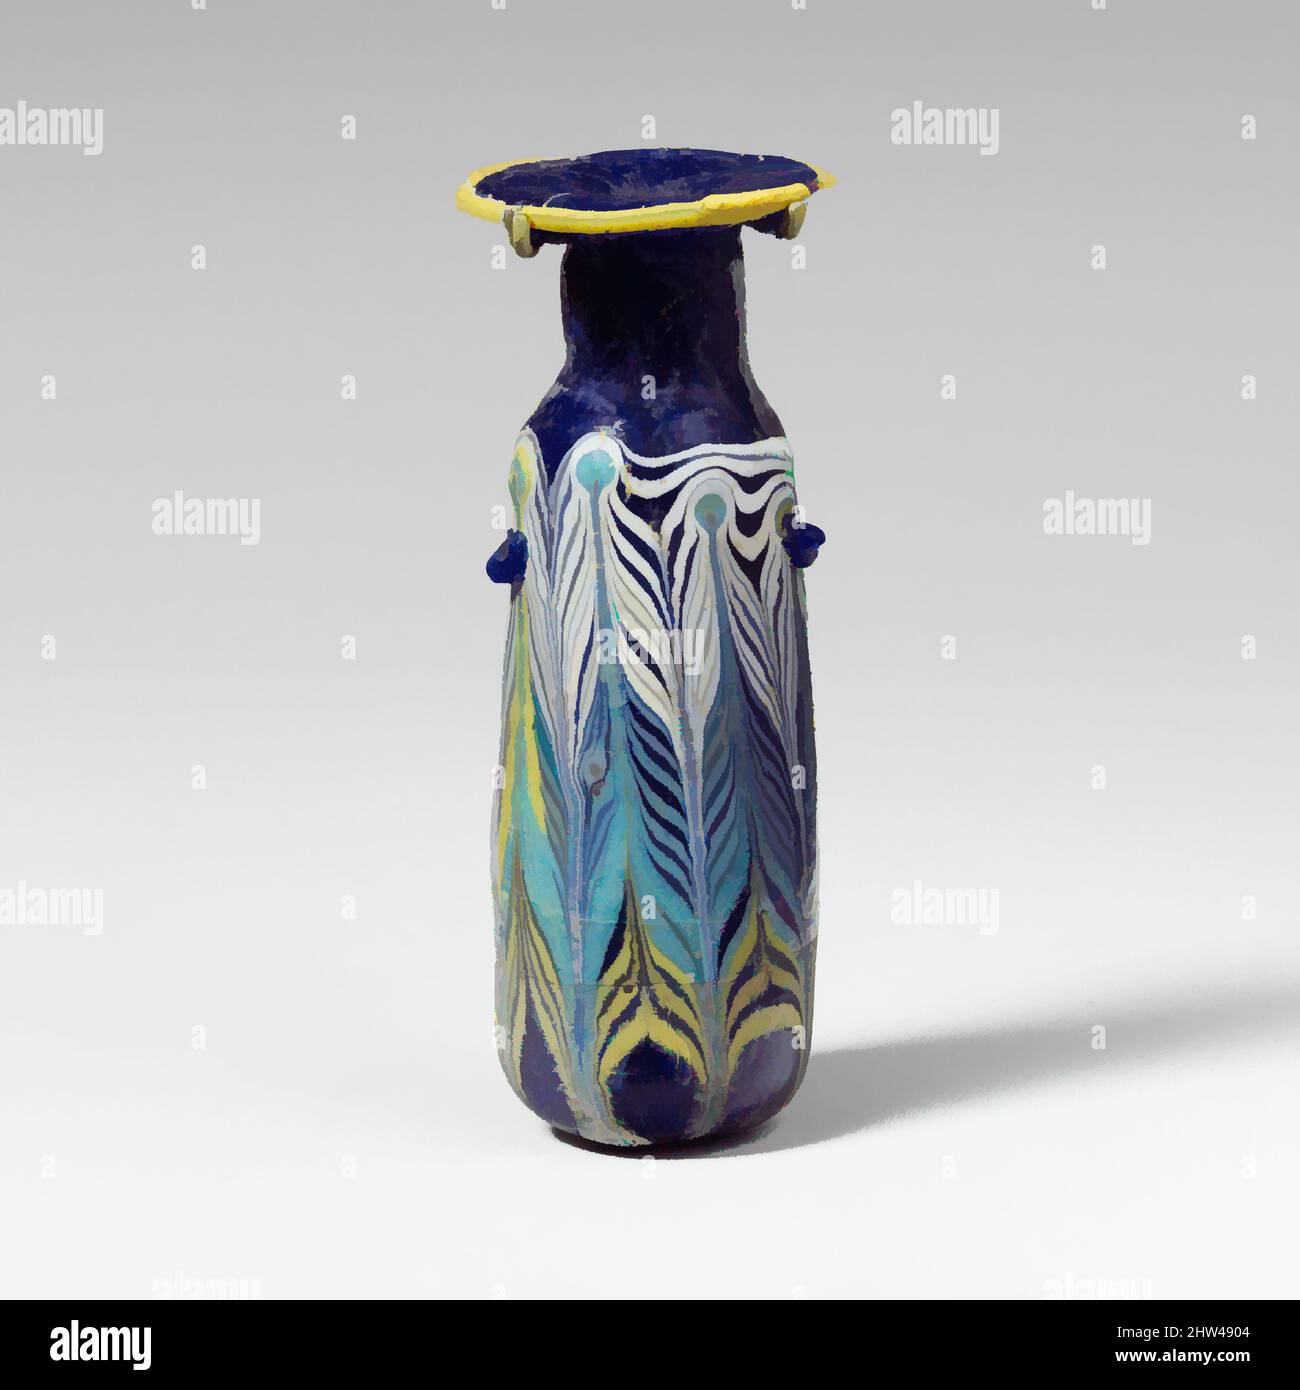 Art inspired by Glass alabastron (perfume bottle), Late Classical or Hellenistic, 4th–3rd century B.C., Eastern Mediterranean or Italian, Glass; core-formed, Group II, H.: 1 in. (2.5 cm), Glass, Translucent cobalt blue, with handles in same color; trails in opaque yellow, opaque white, Classic works modernized by Artotop with a splash of modernity. Shapes, color and value, eye-catching visual impact on art. Emotions through freedom of artworks in a contemporary way. A timeless message pursuing a wildly creative new direction. Artists turning to the digital medium and creating the Artotop NFT Stock Photo